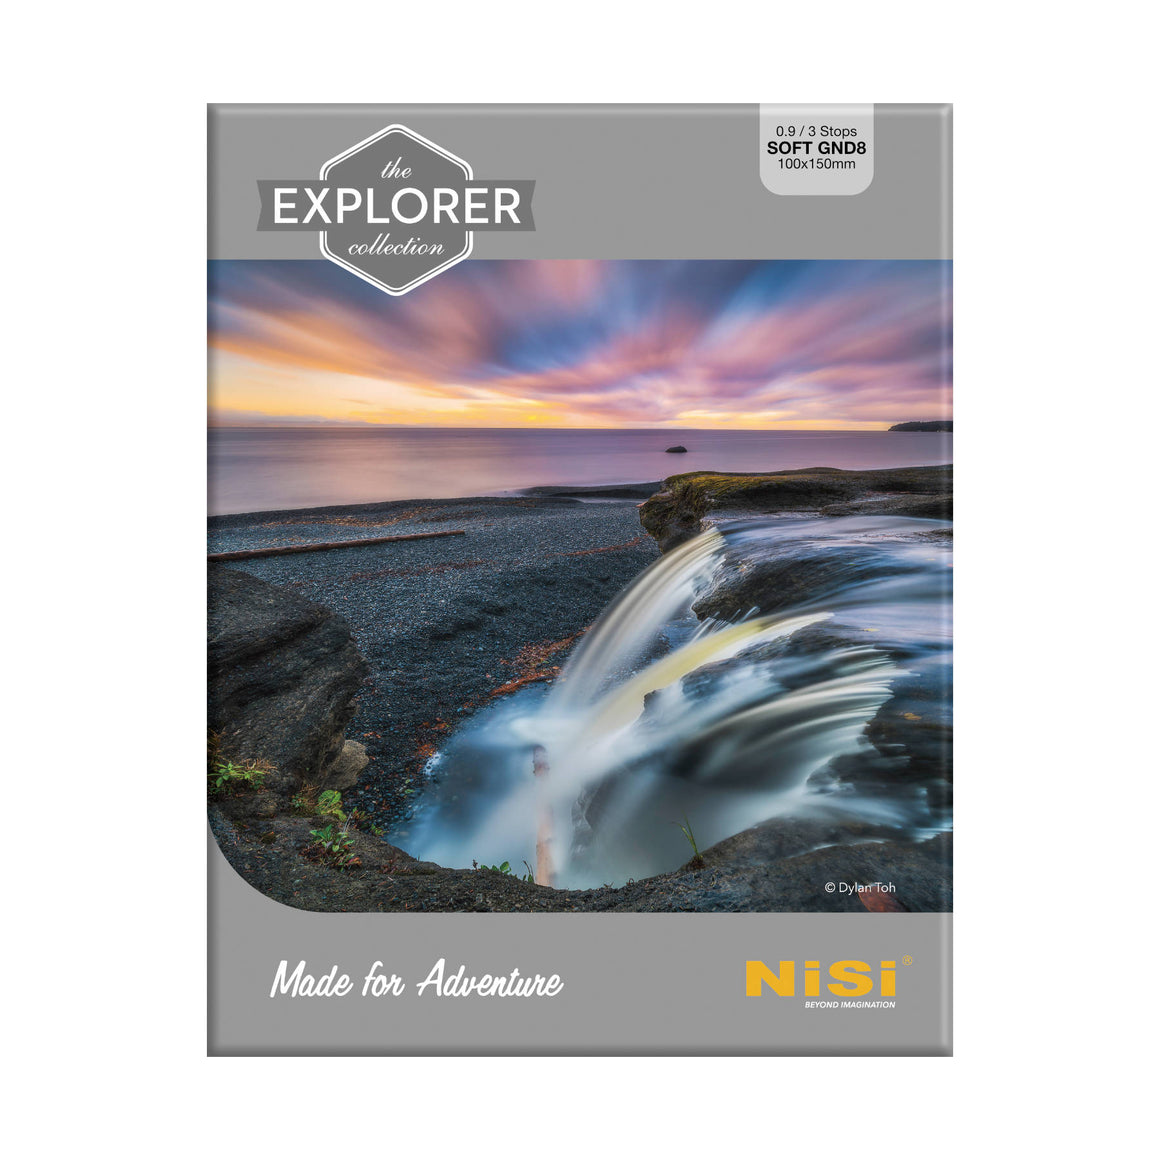 nisi-explorer-collection-100x150mm-nano-ir-soft-graduated-neutral-density-filter-gnd8-0-9-3-stop